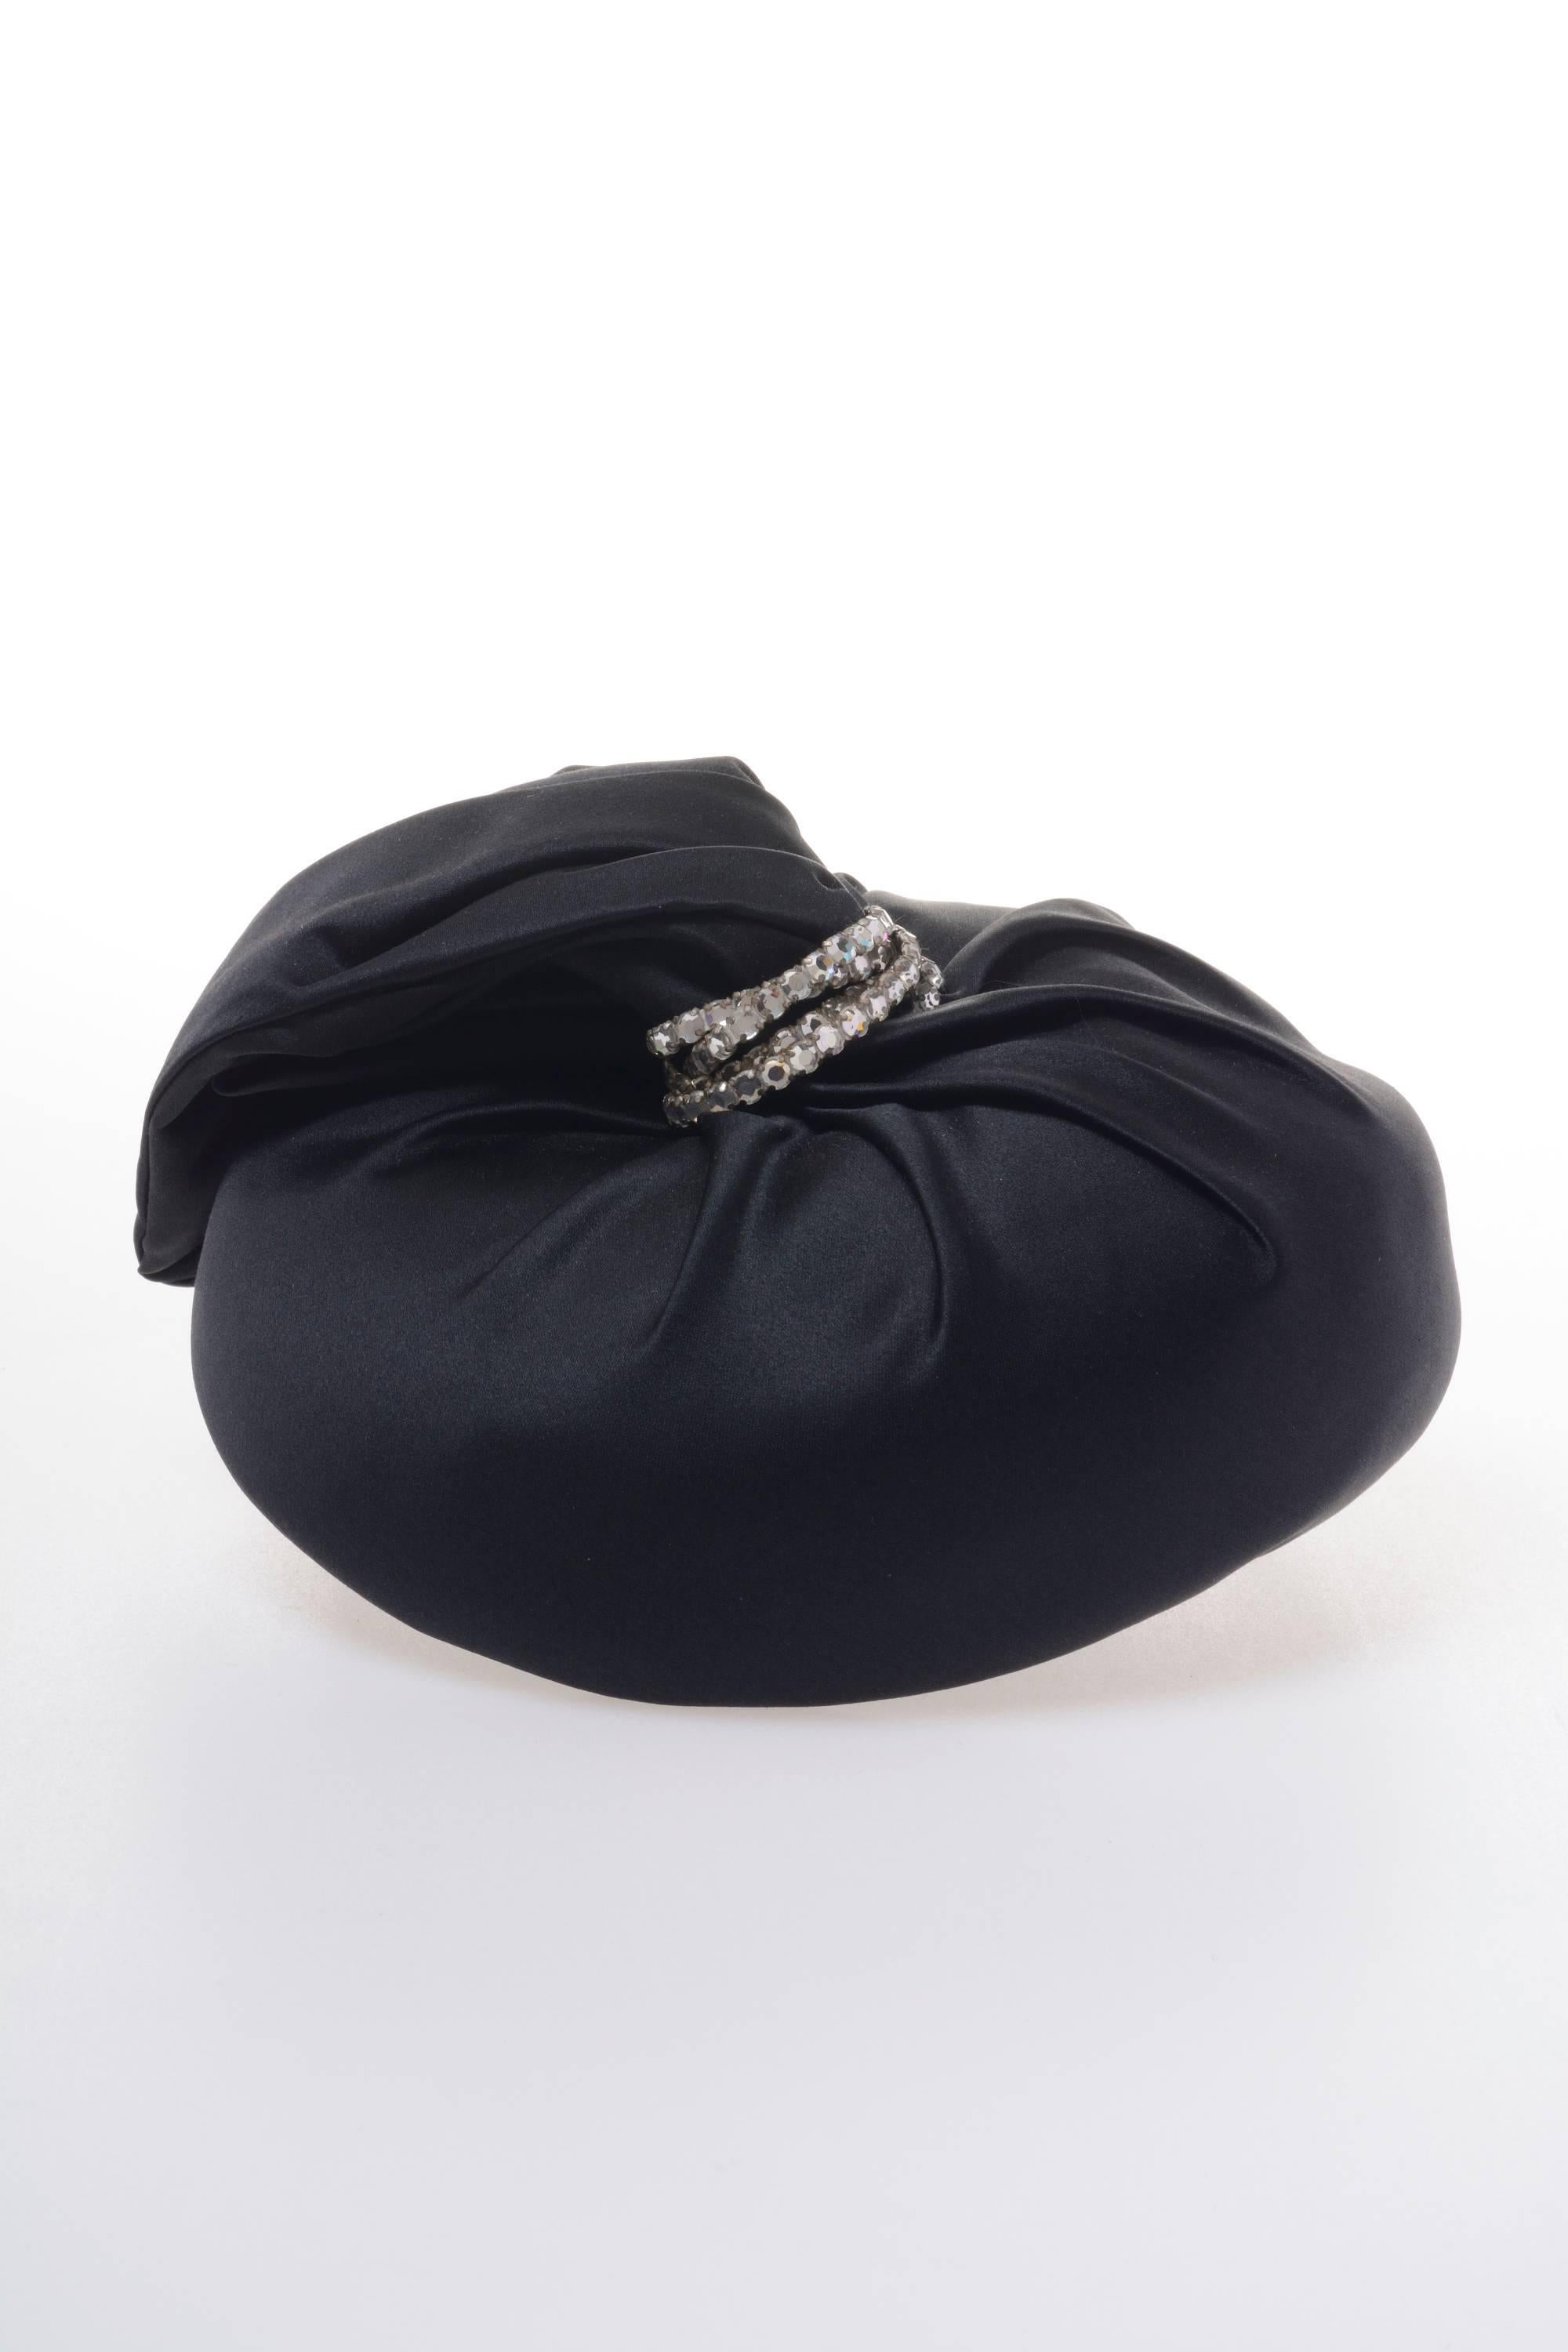 This lovely 1960s pillbox fascinator hat by GALLIA PETER has a silver rhinestone lace, made of black satin, two metallic supports on each side. It's fully lined.

Excellent vintage condition 

Label: GALLIA PETER Milano Via Montenapoleone 3
Color: